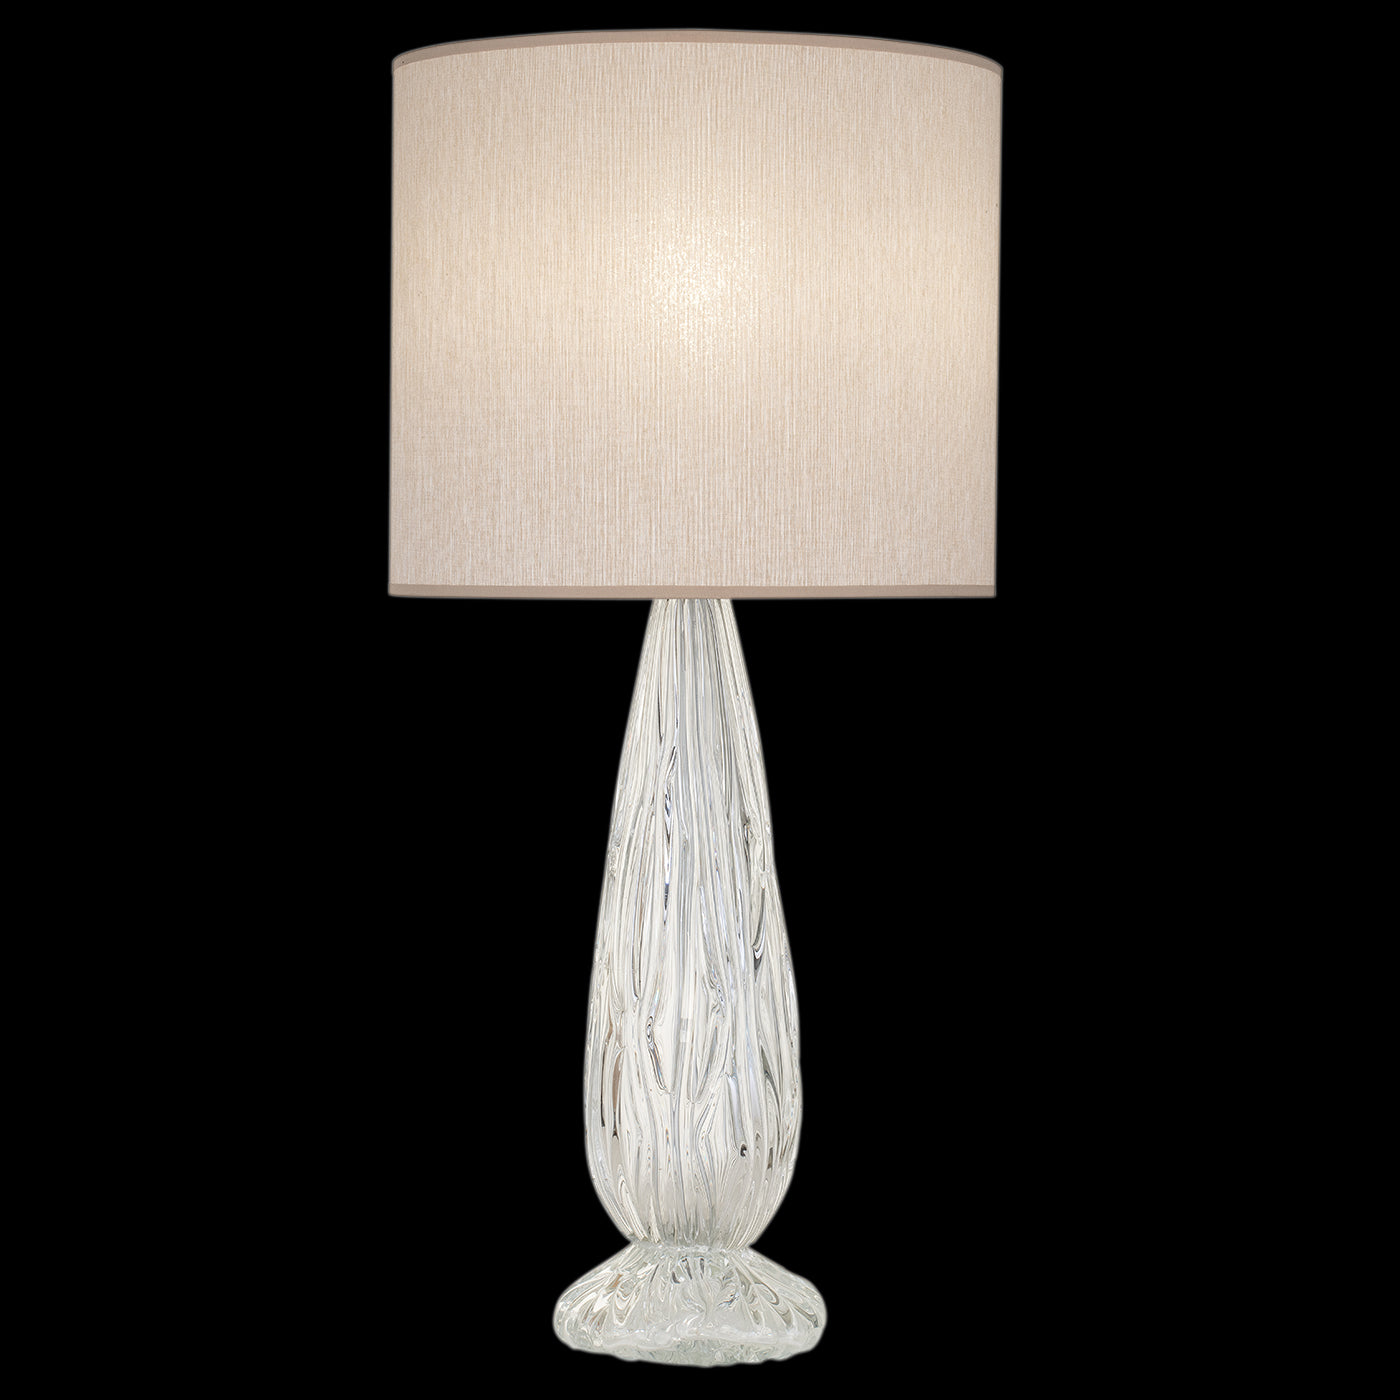 Fine Art Las Olas 30.5" Table Lamp Lamp Fine Art Handcrafted Lighting Silver with Beige Shade  